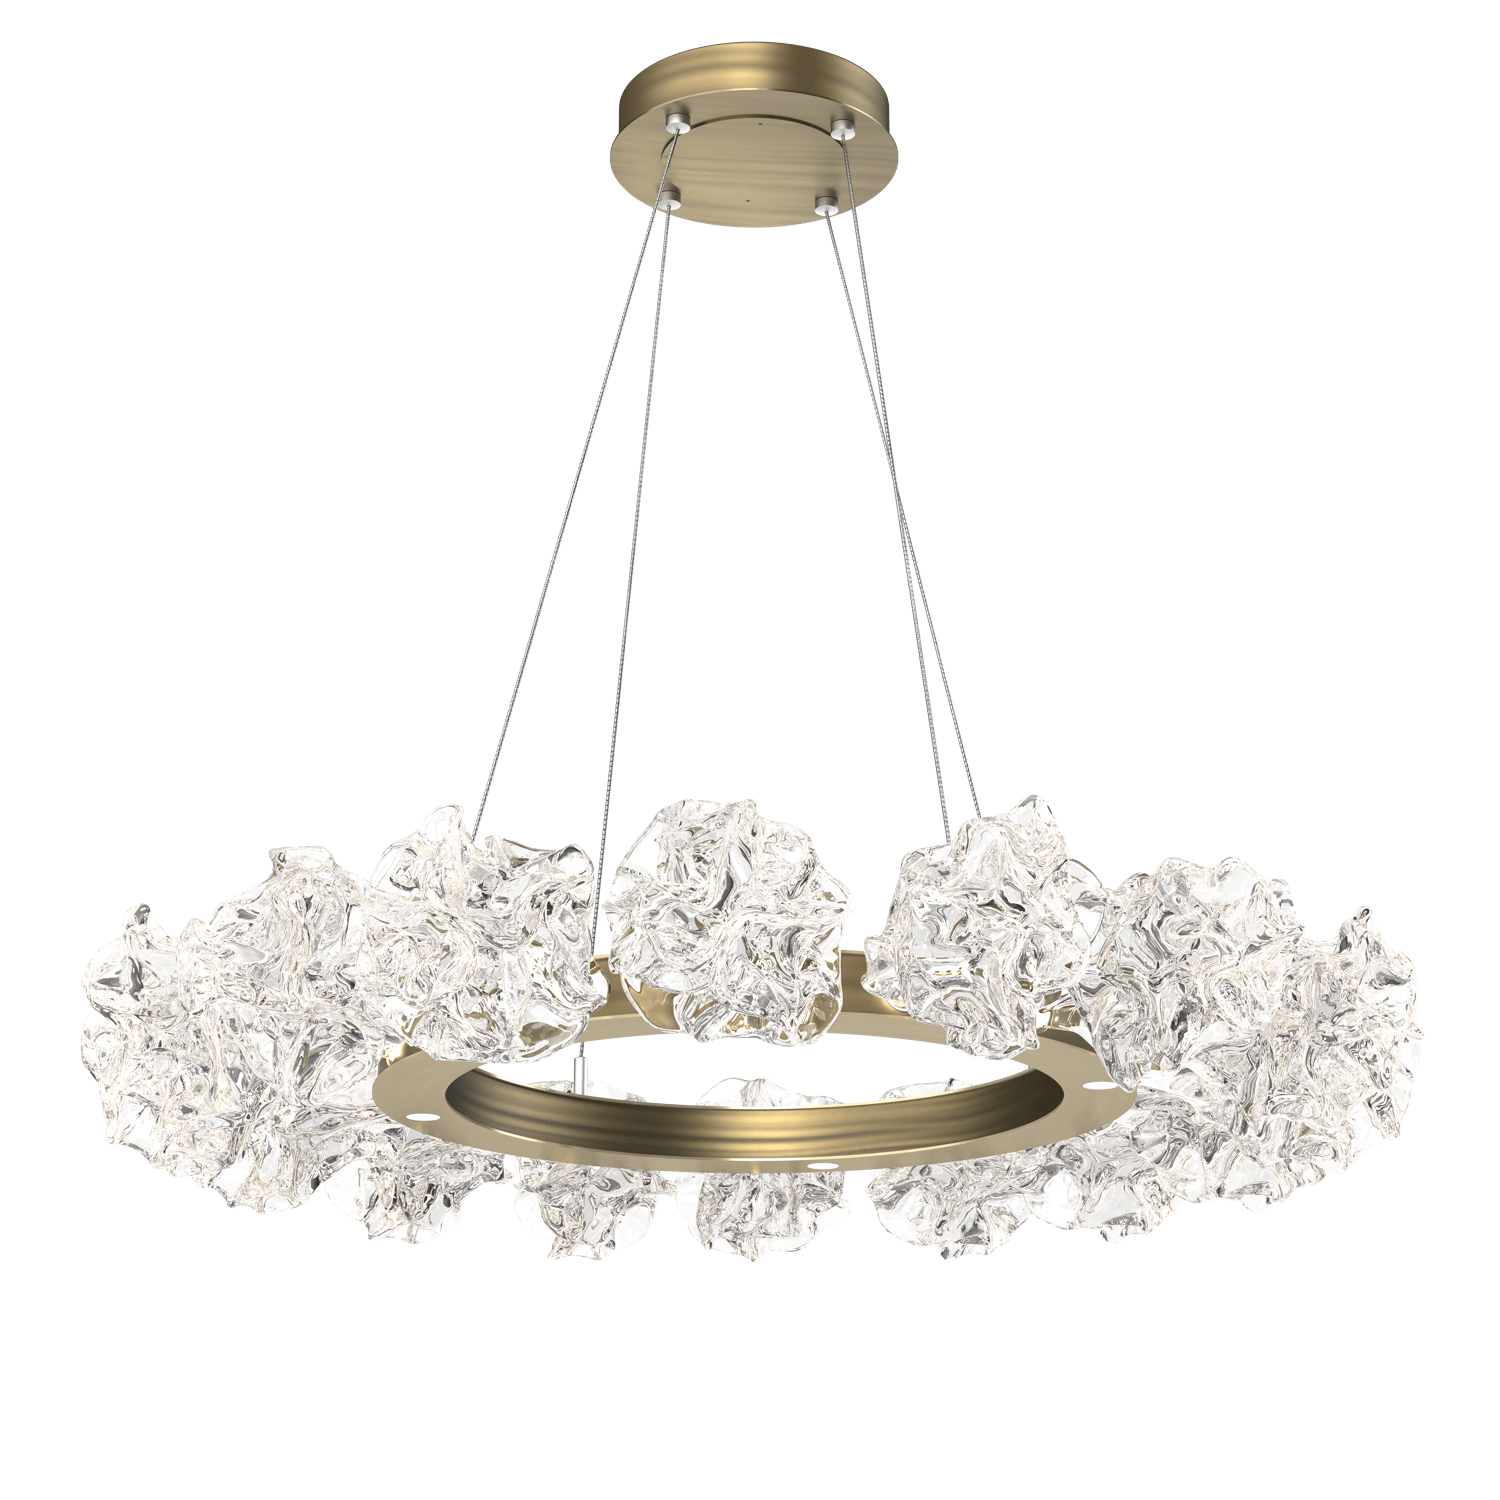 CHB0059-36-HB-Hammerton-Studio-Blossom-36-inch-radial-ring-chandelier-with-heritage-brass-finish-and-clear-handblown-crystal-glass-shades-and-LED-lamping